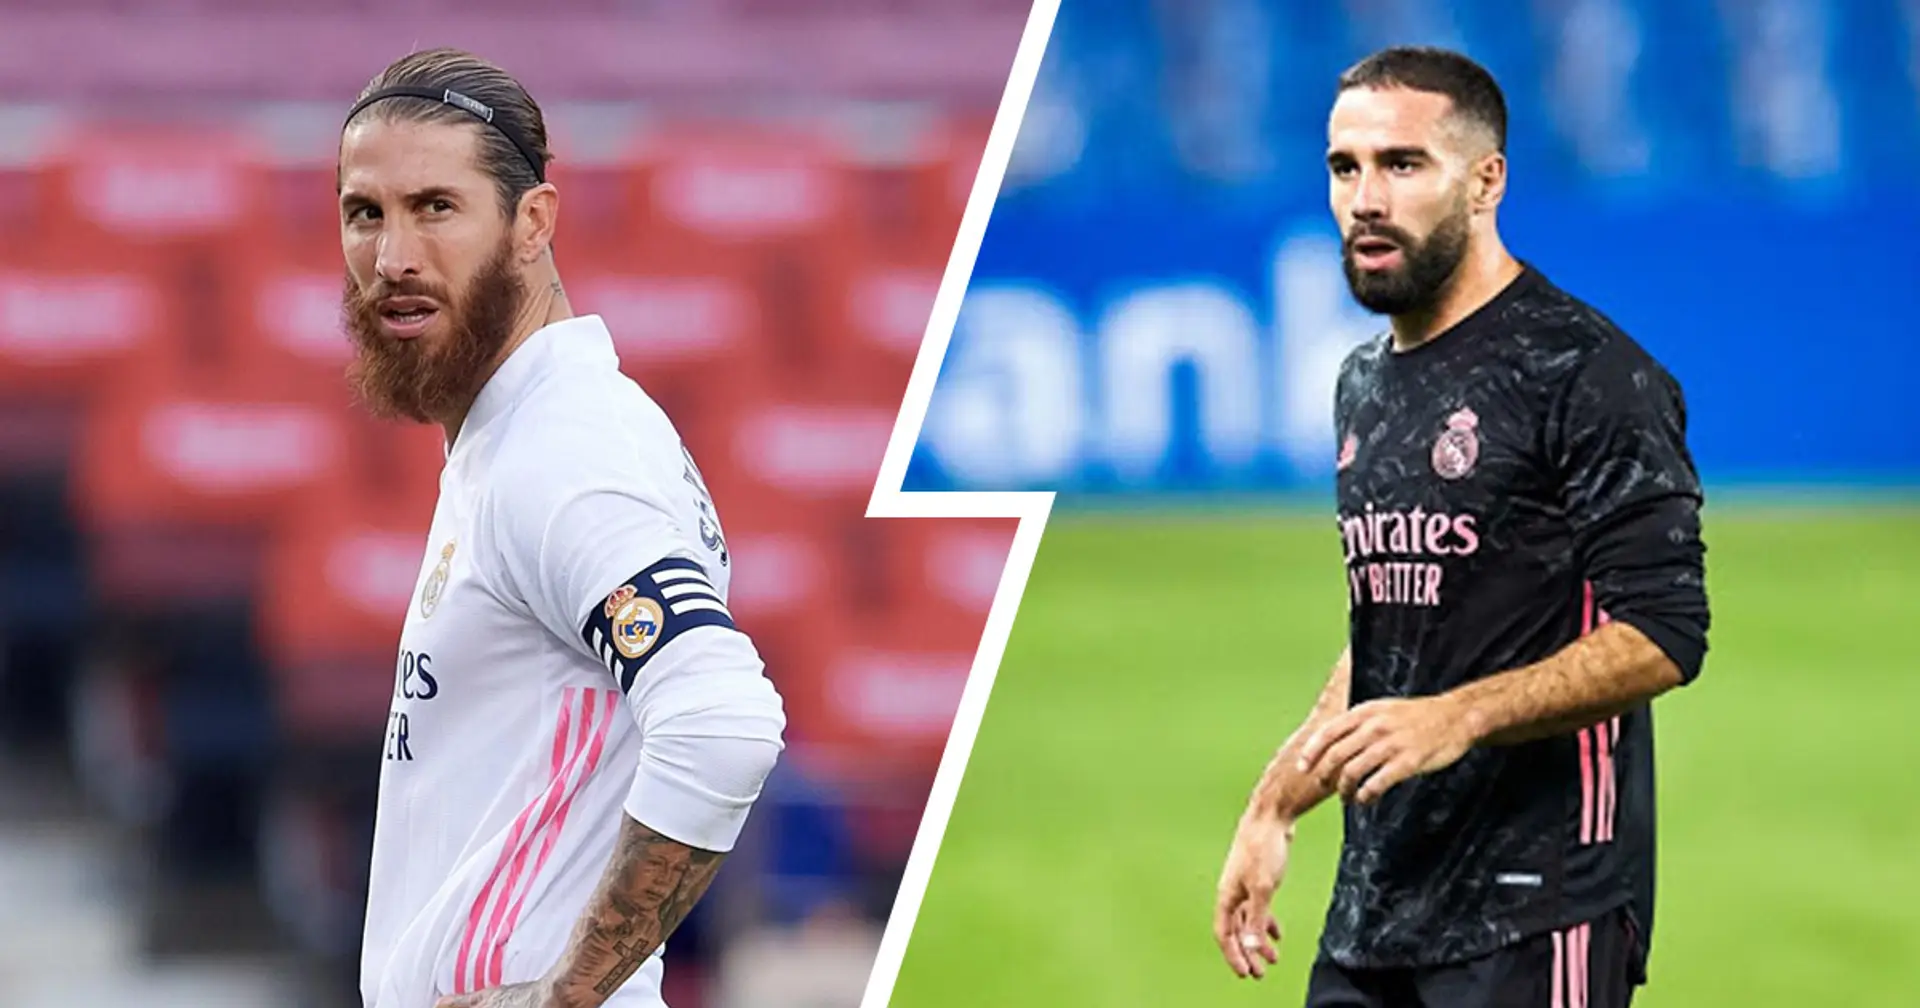 Sergio Ramos and Dani Carvajal out of Alcoyano clash after missing Tuesday's training session: AS